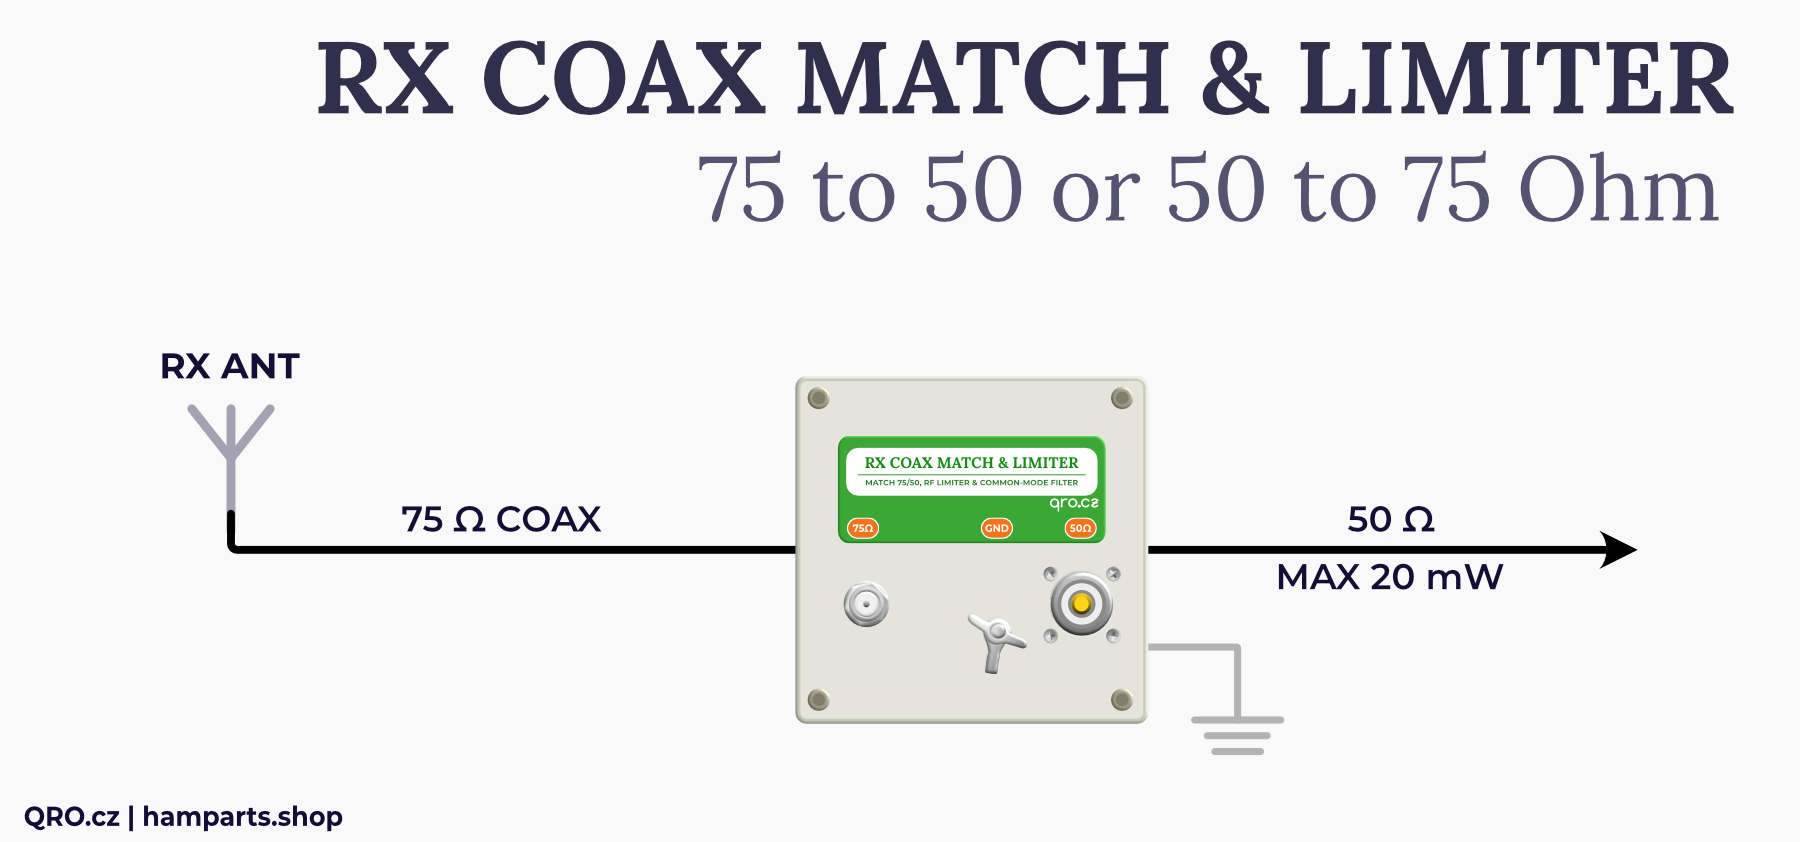 rx coax match and limiter with cmcc in box by qro.cz hamparts.shop